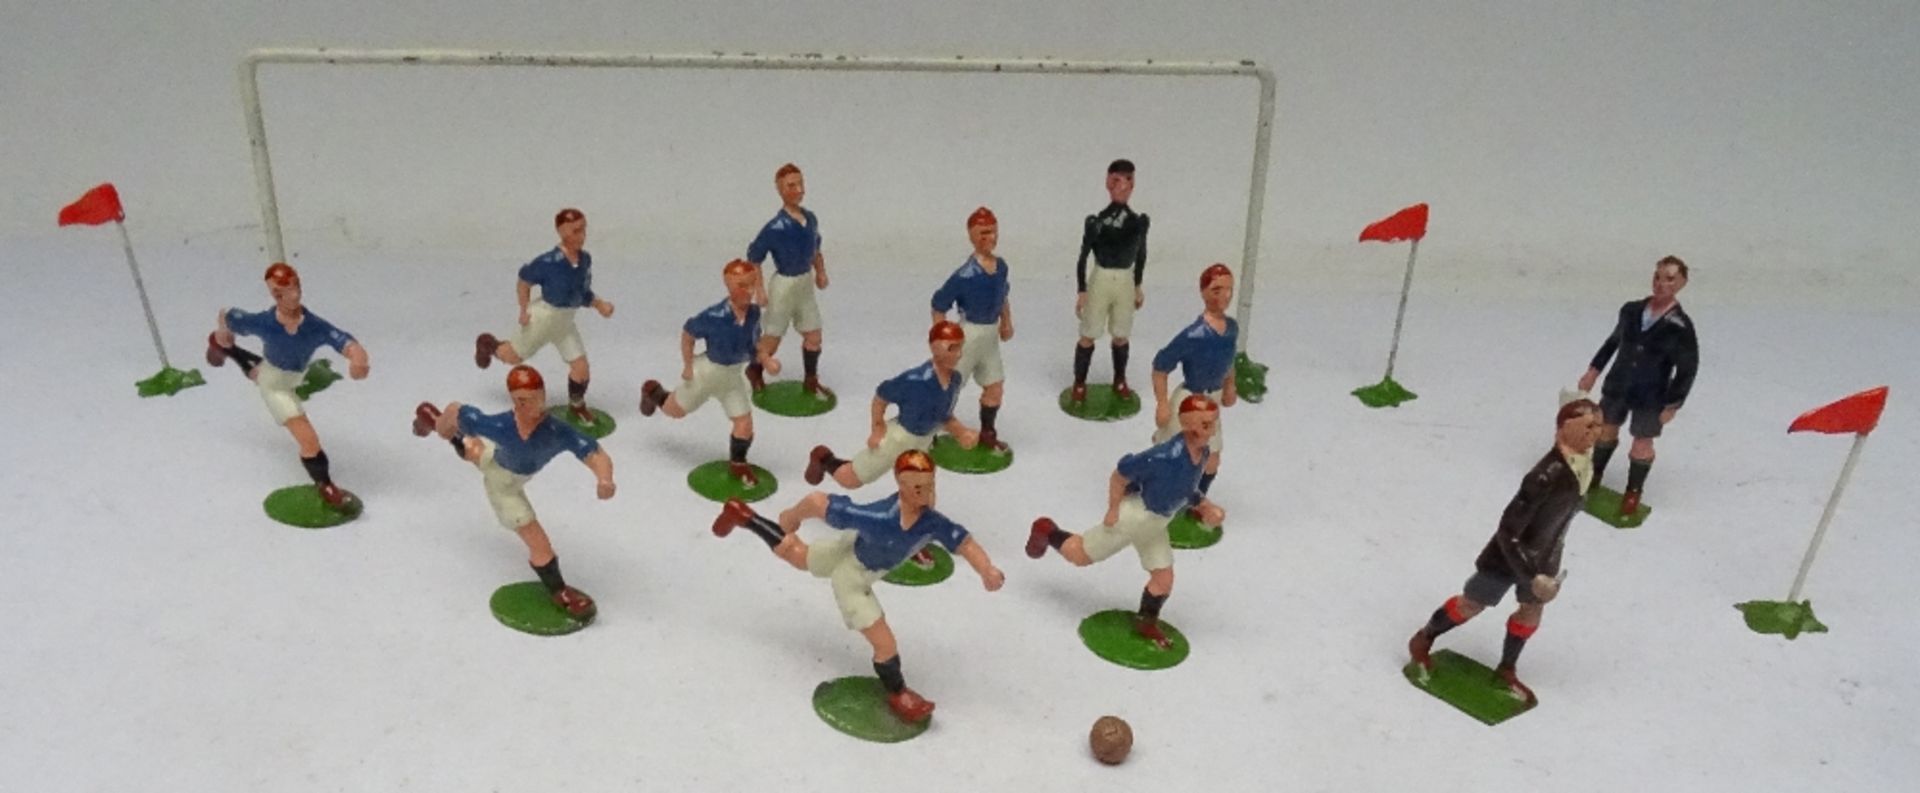 Britains Famous Football Teams: CHELSEA - Image 3 of 8